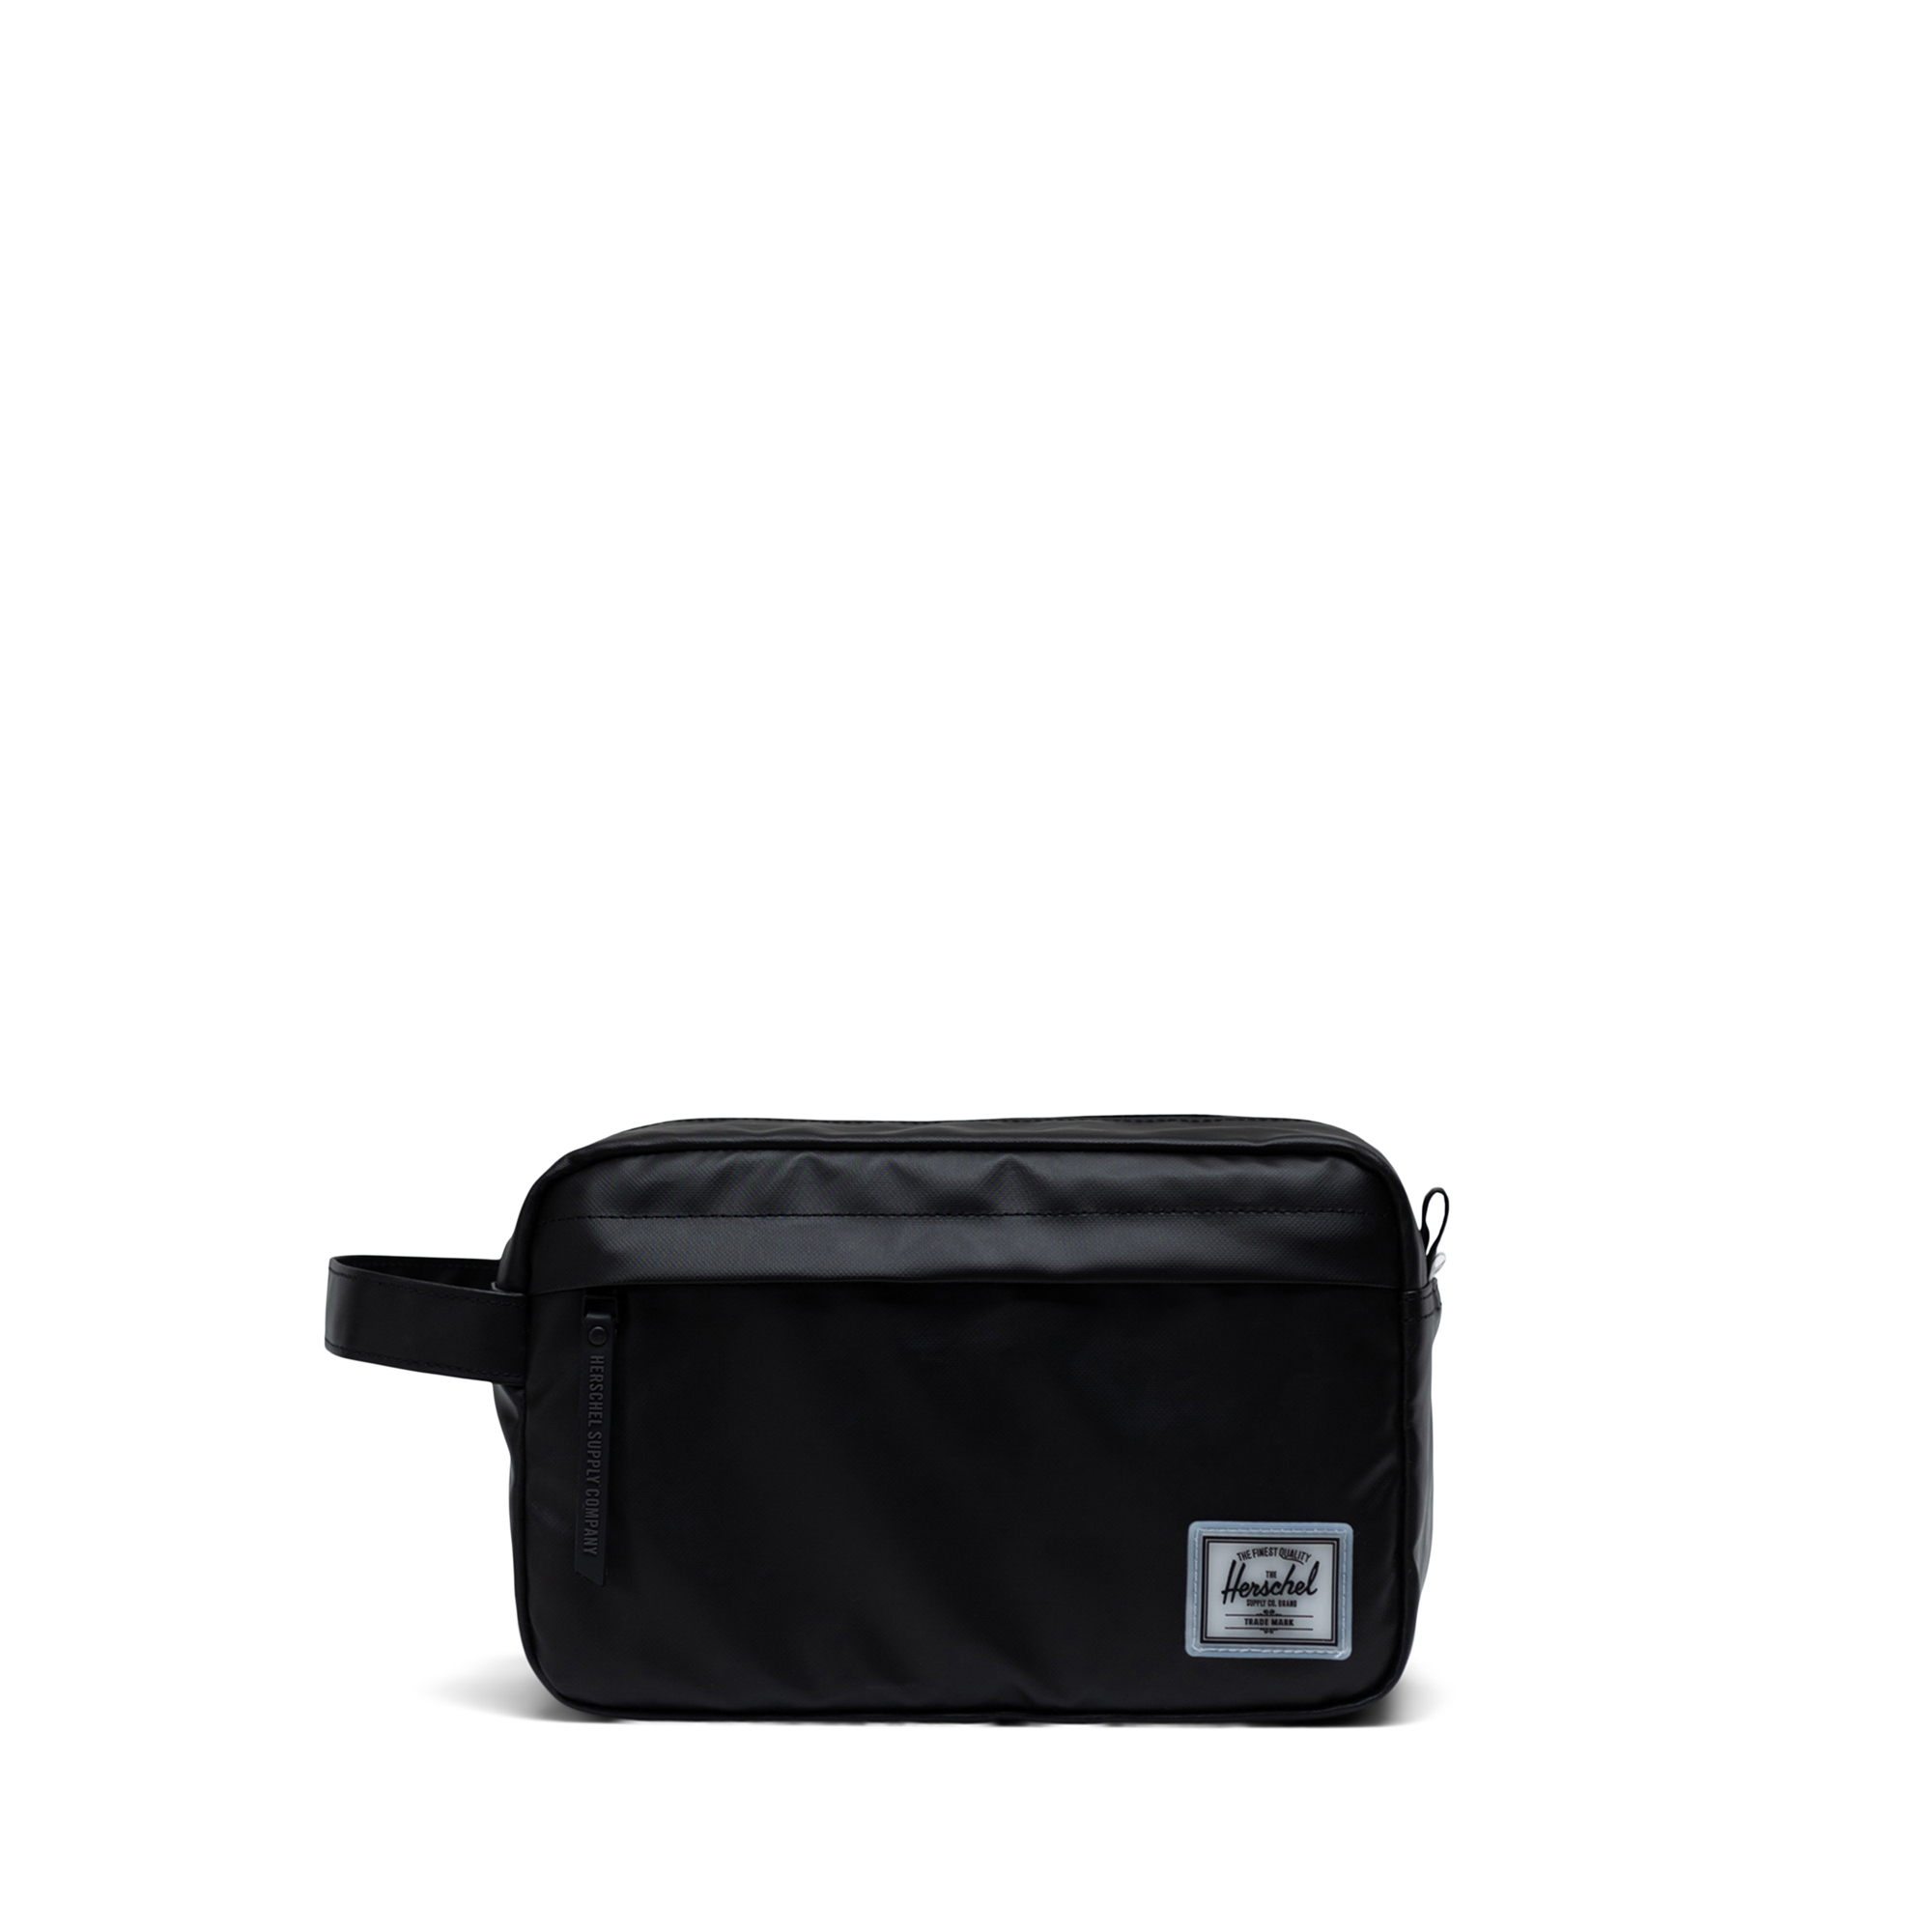 Luggage | Hard and Soft Shell Cases | Herschel Supply Company